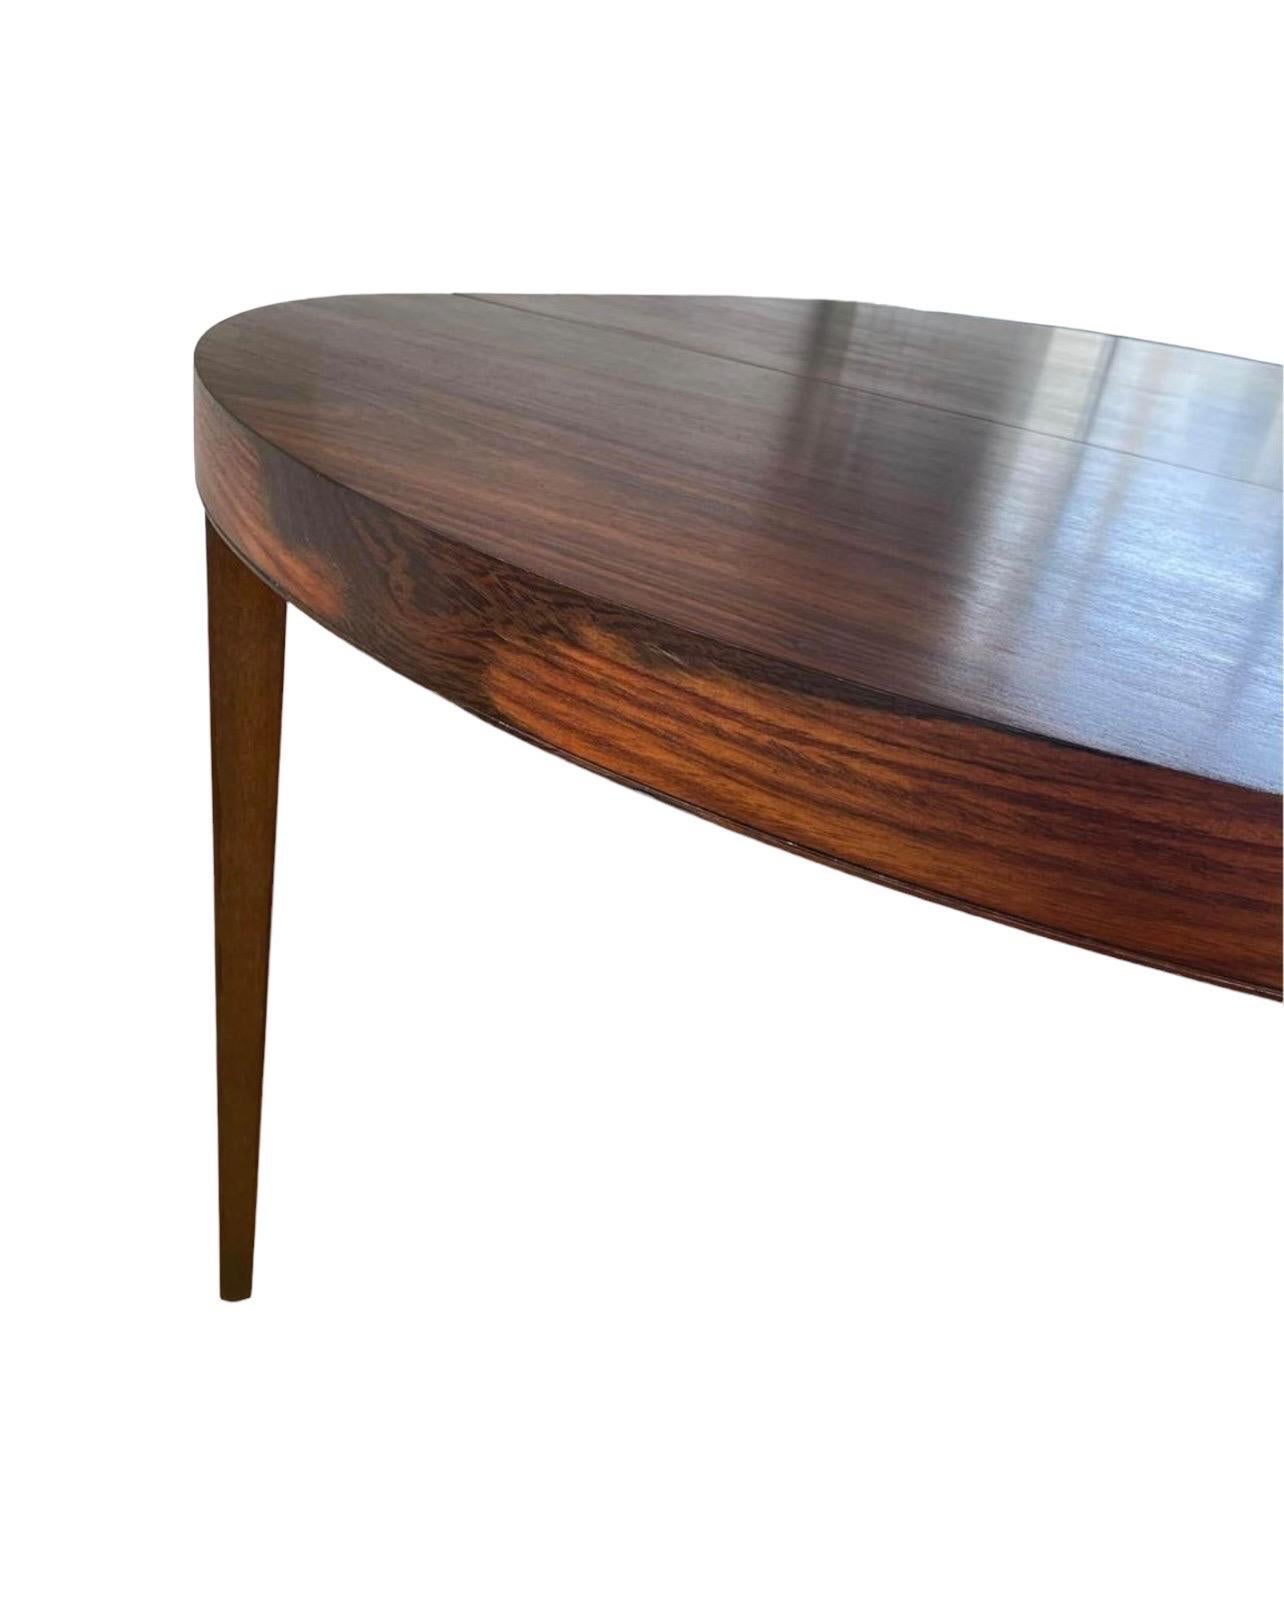 Late 20th Century Vintage Danish Mid Century Modern Rosewood Dining Table Extendable with one leaf